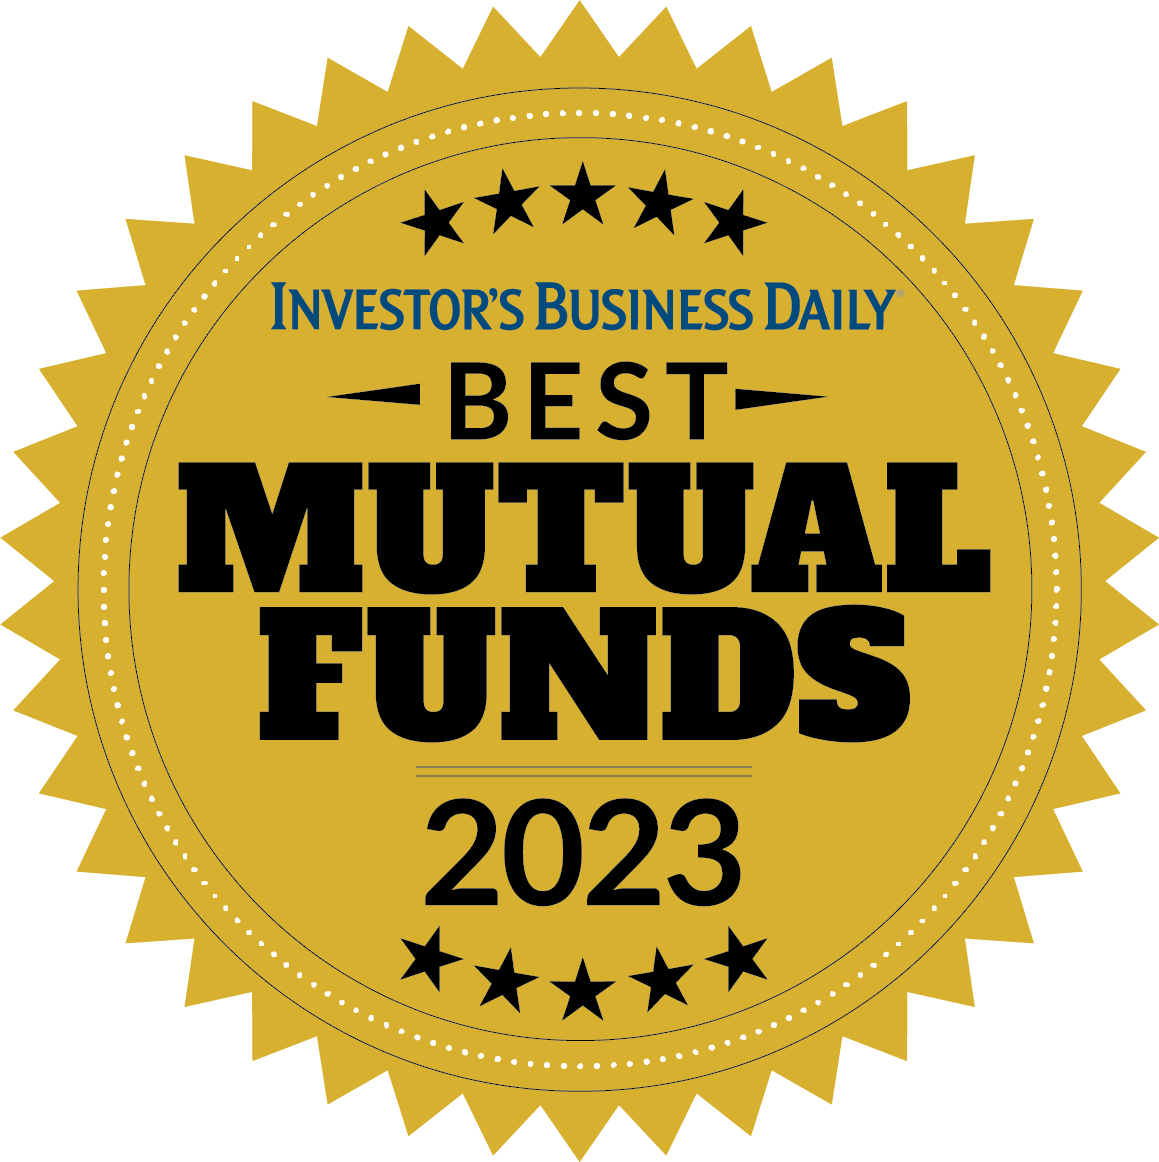 Investor's Business Daily Best Mutual Funds Award